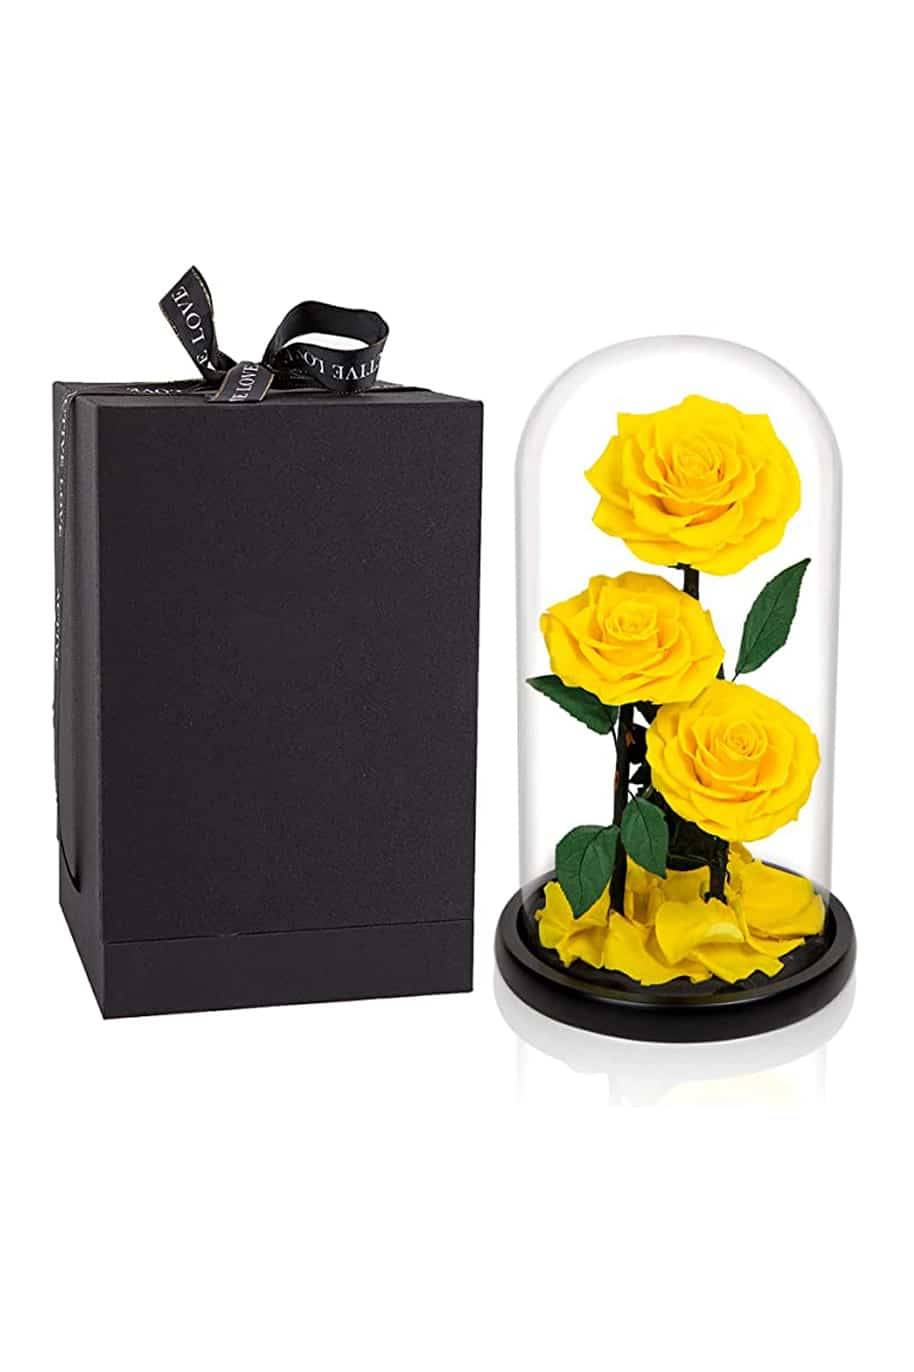 Forever Rose 3 In Glass Dome Yellow